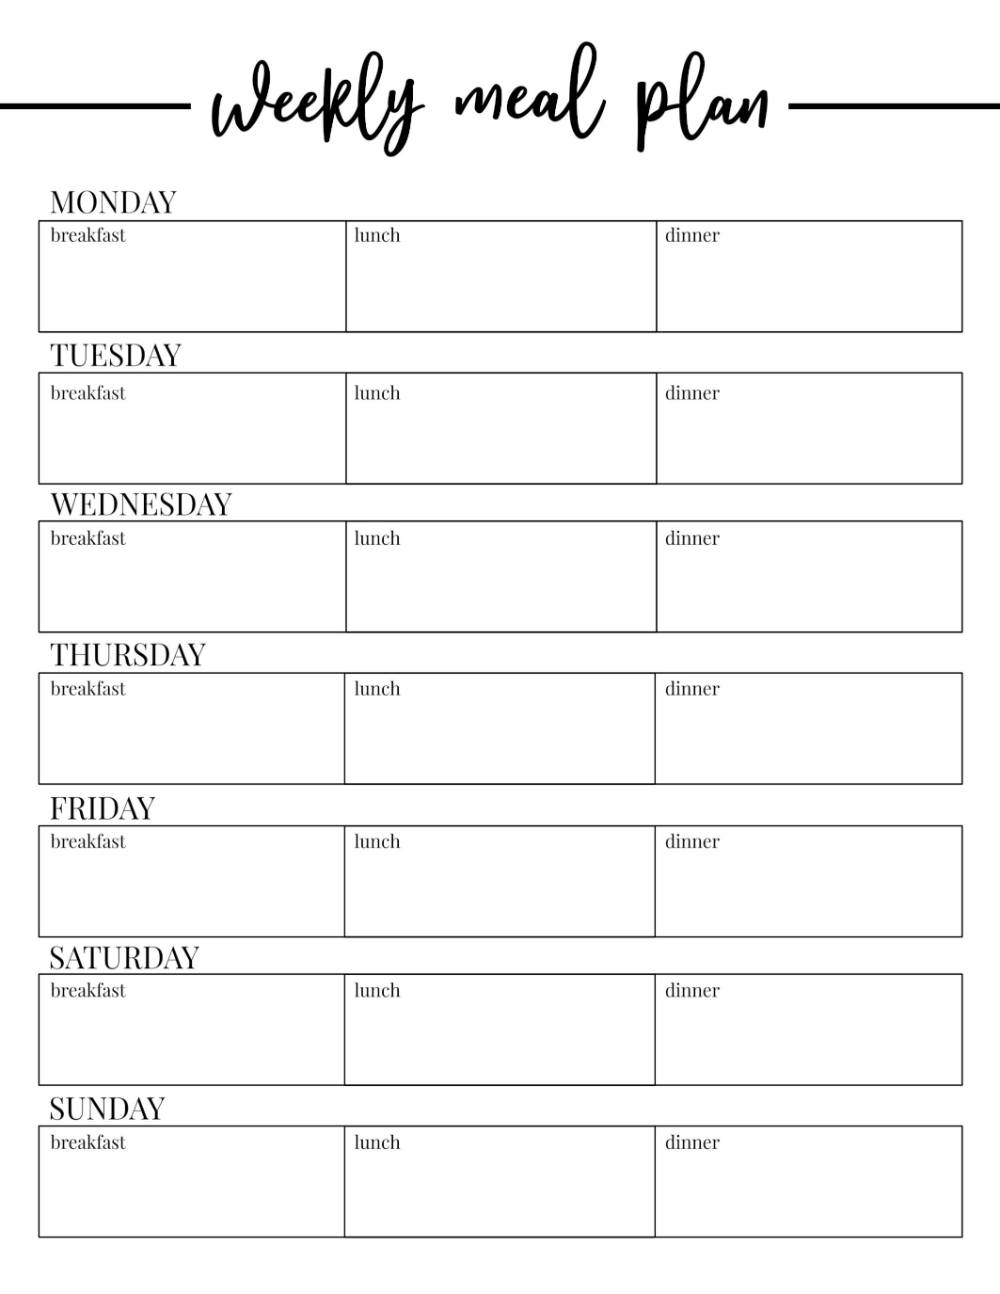 Plan Templates Meal Weekly Template Wondrous Word Doc Planning For Weekly Meal Planner Te Free Meal Planner Meal Planning Template Weekly Meal Planner Template